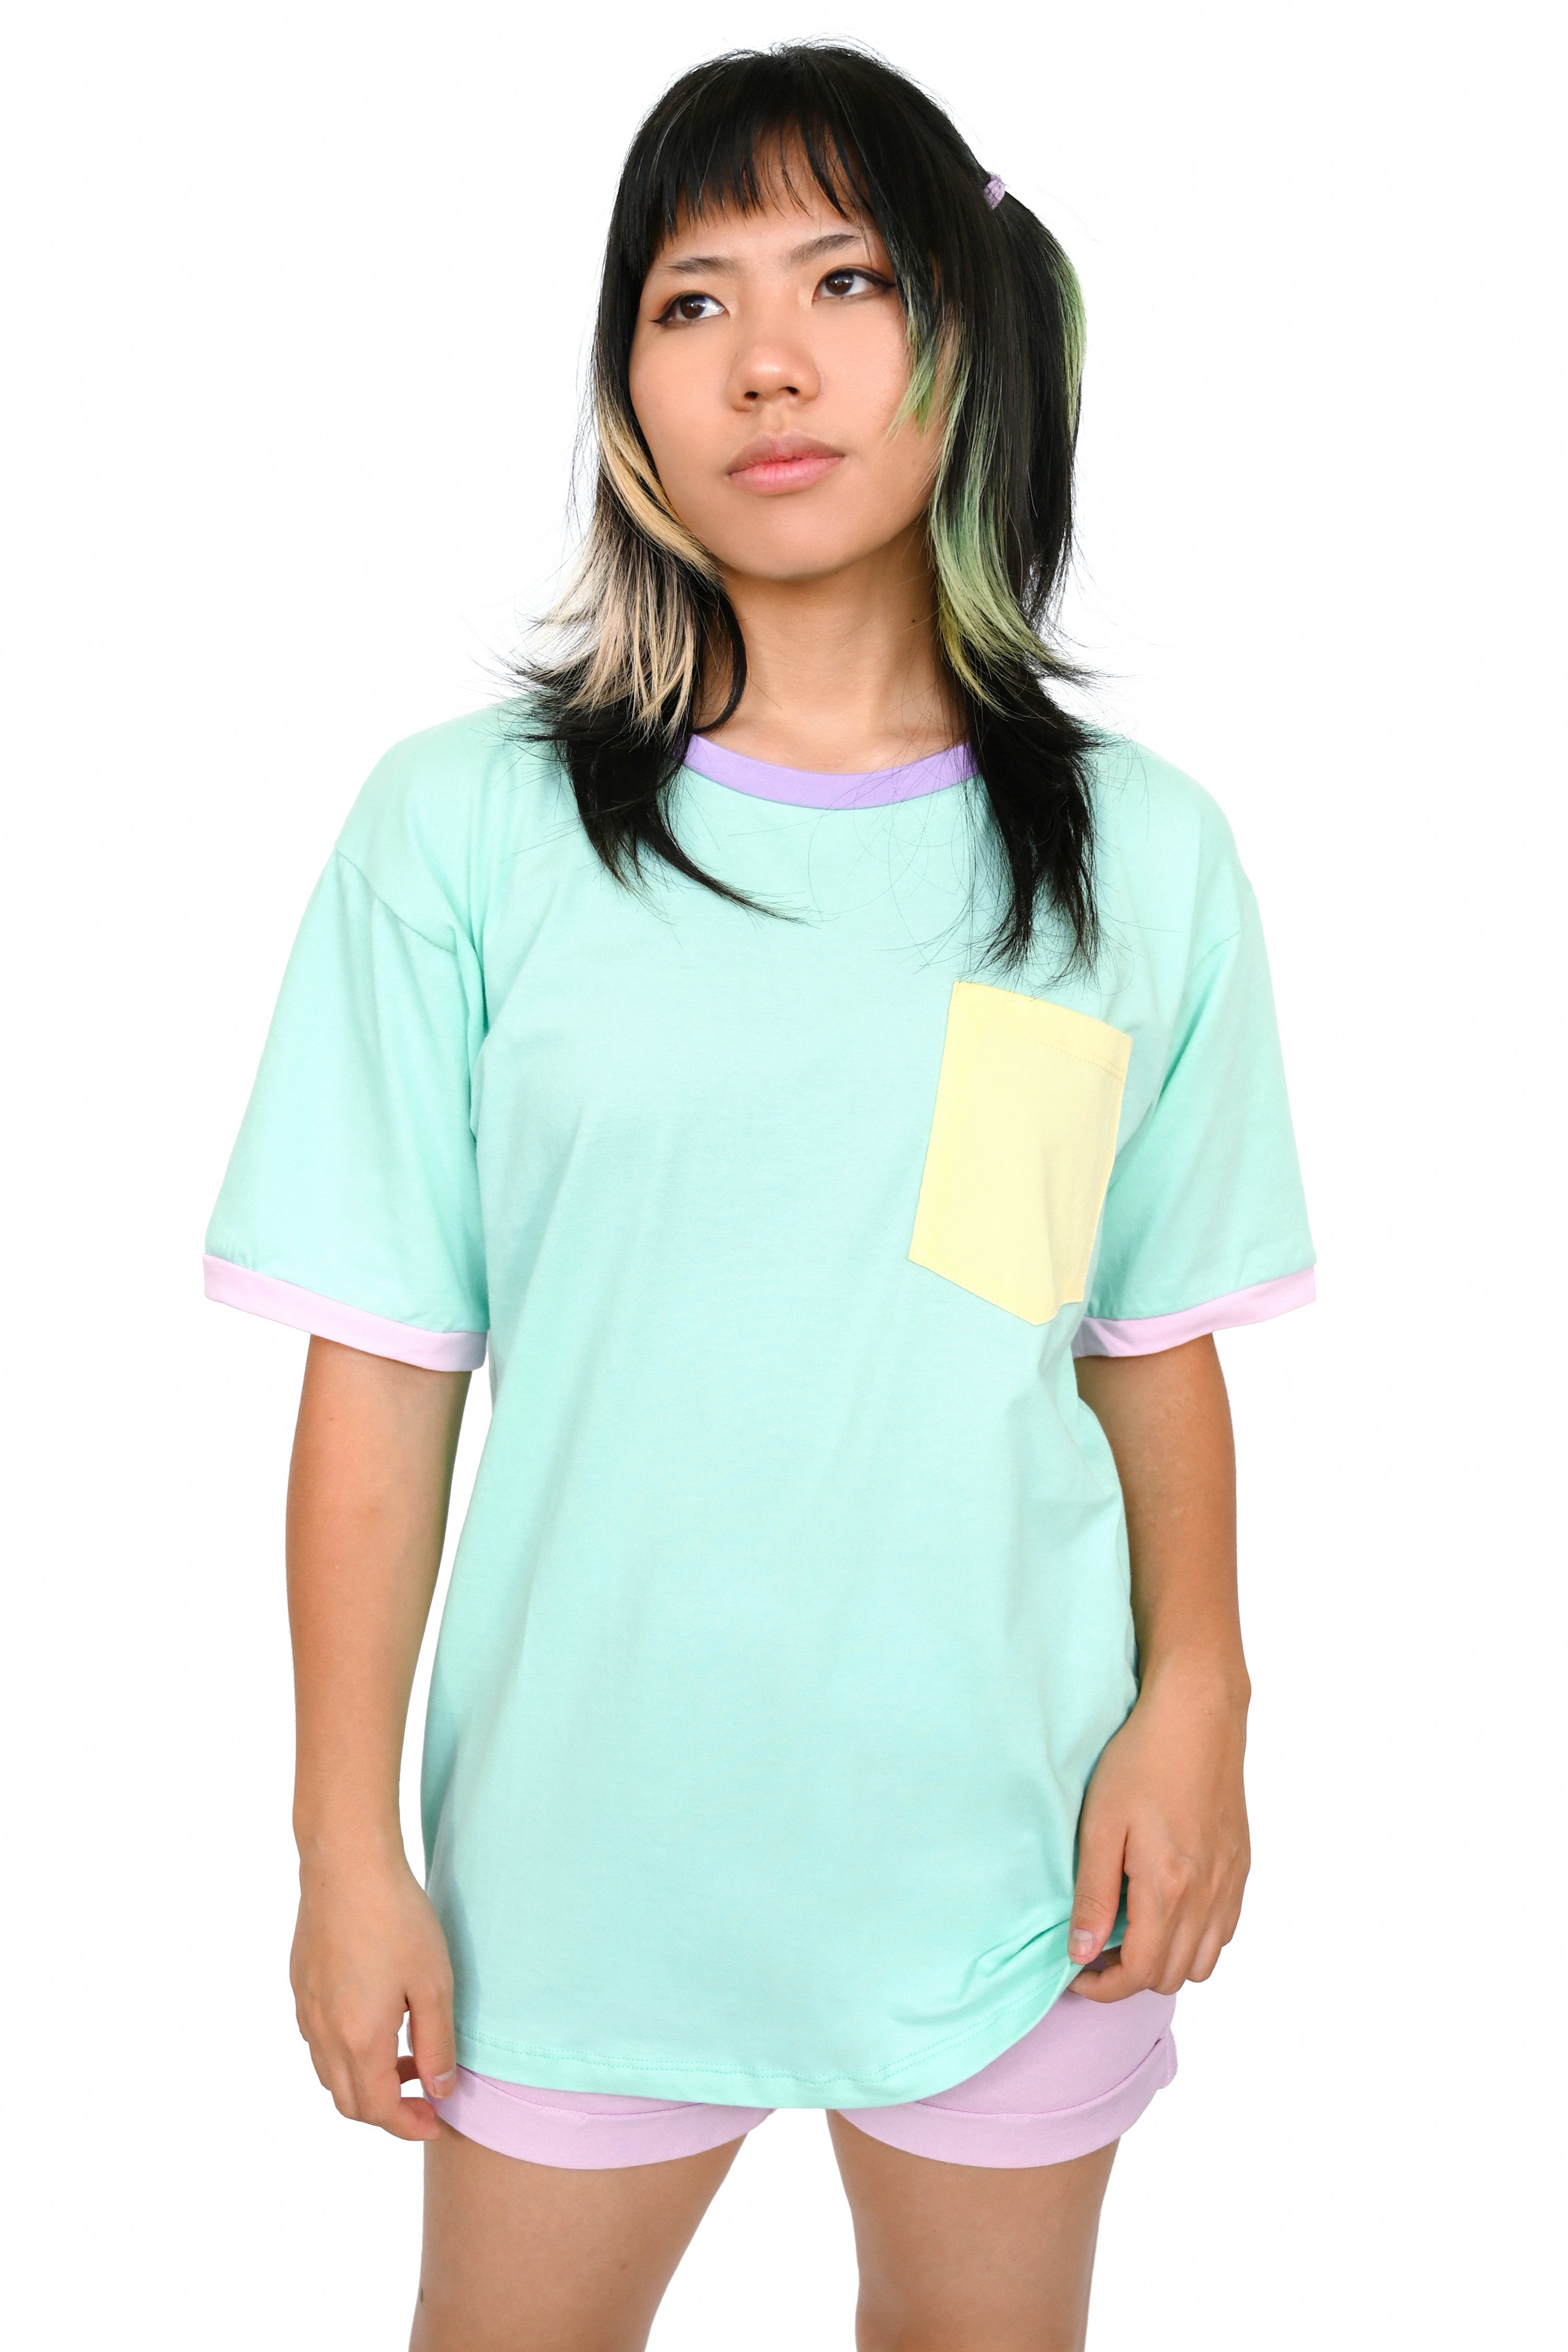 mint colorblock unisex t shirt with pink sleeve trim, yellow pocket, and lavender collar